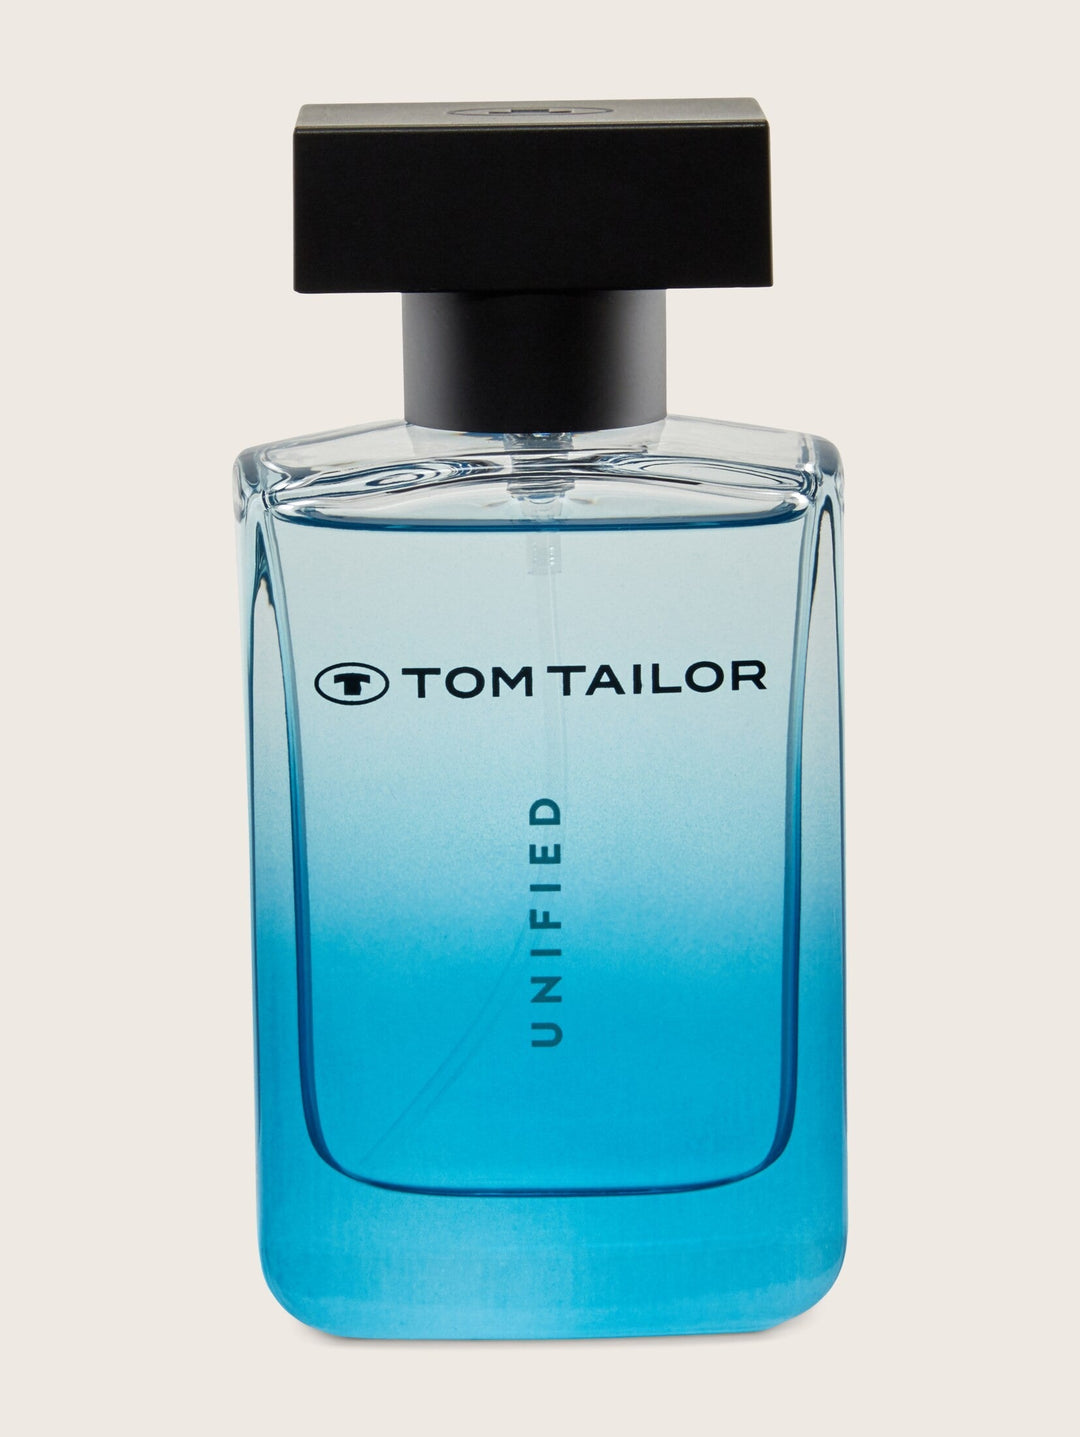 TOM TAILOR UNIFIED MAN EDT 50ML